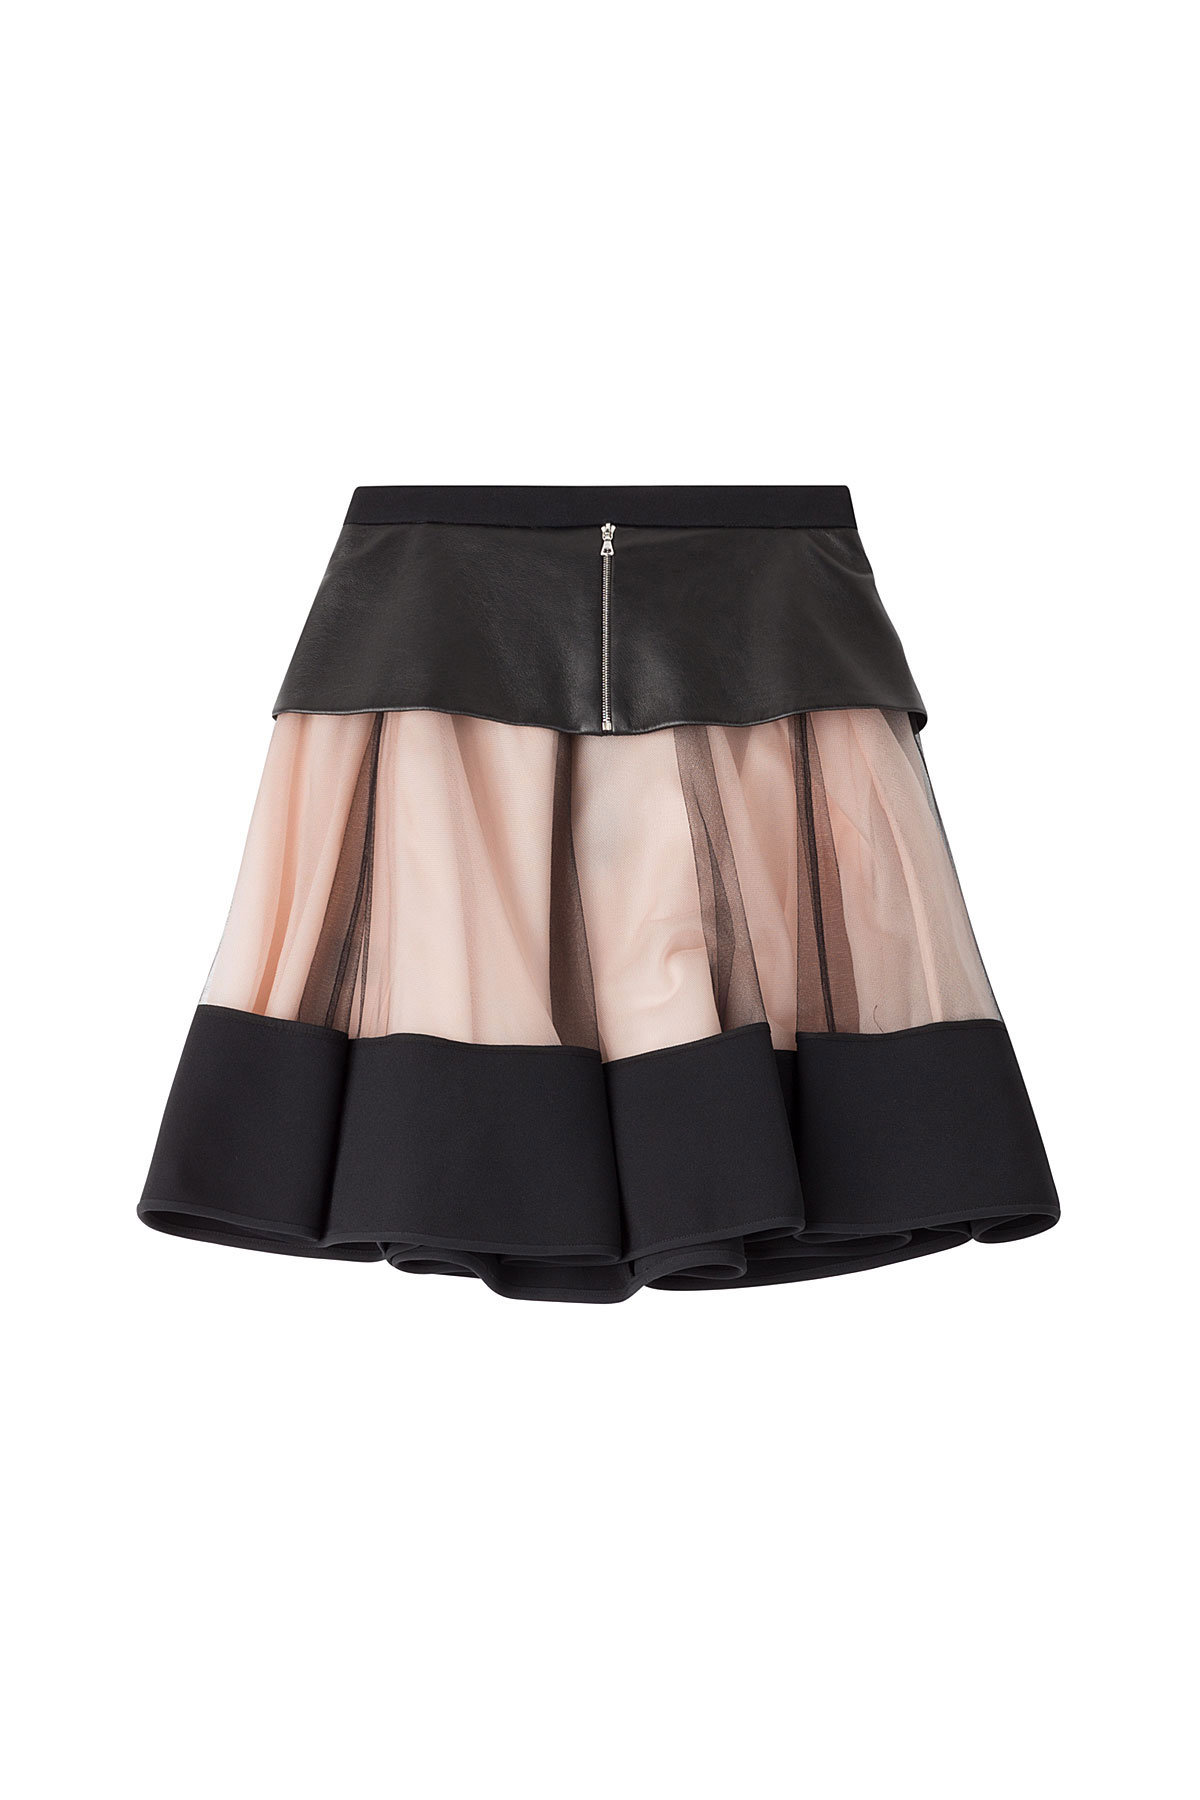 David Koma - Flared Skirt with Leather and Tulle